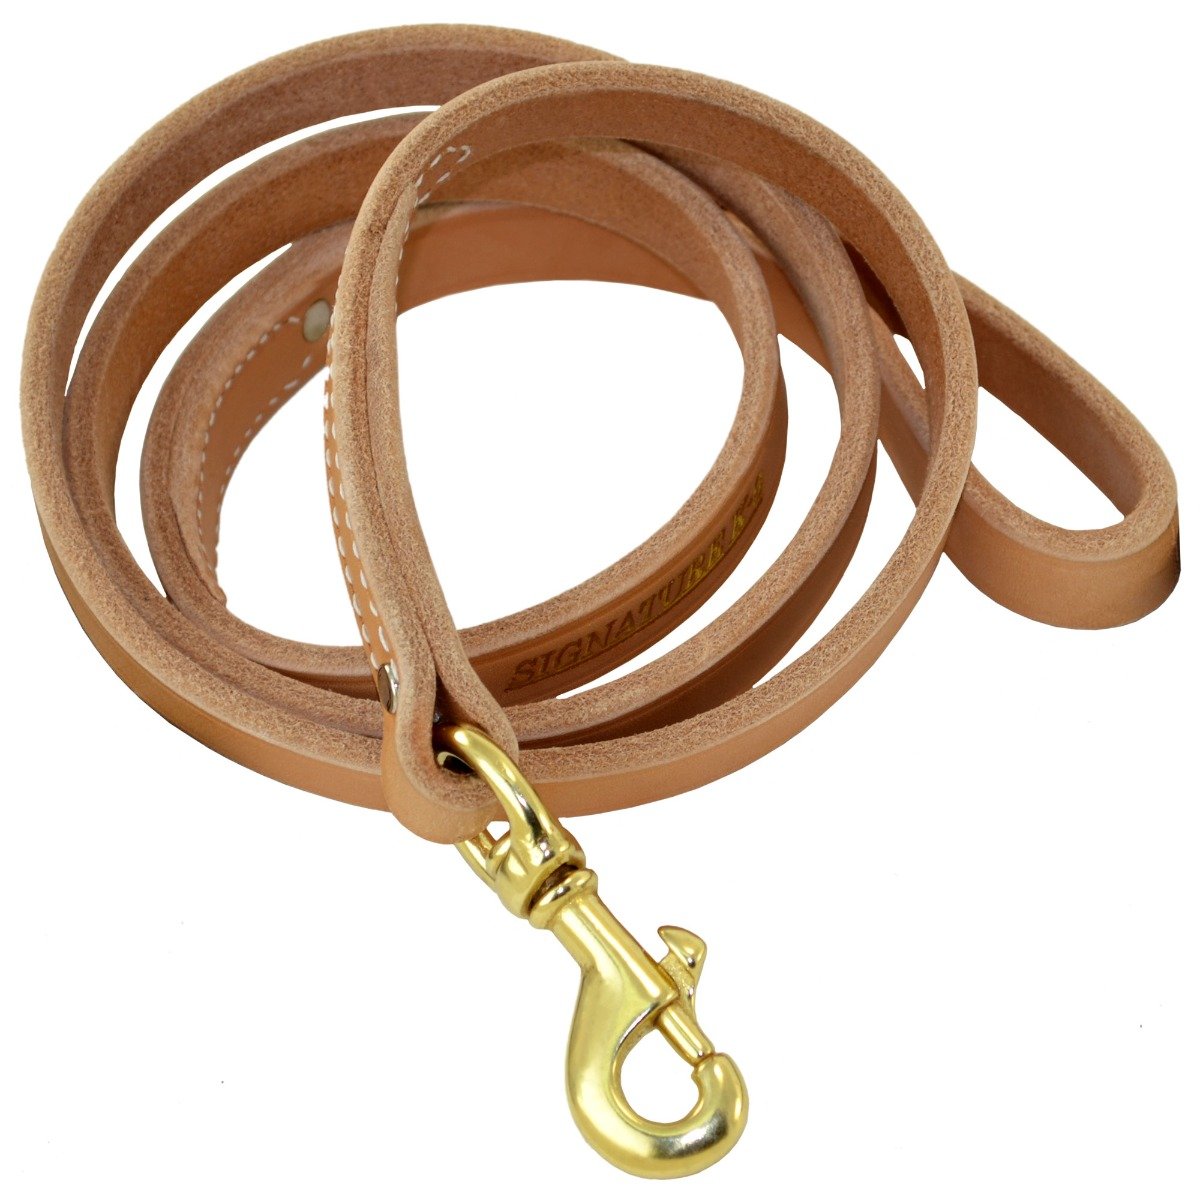 Braided Leather Leash  Hand-Crafted American Made - Ray Allen Manufacturing